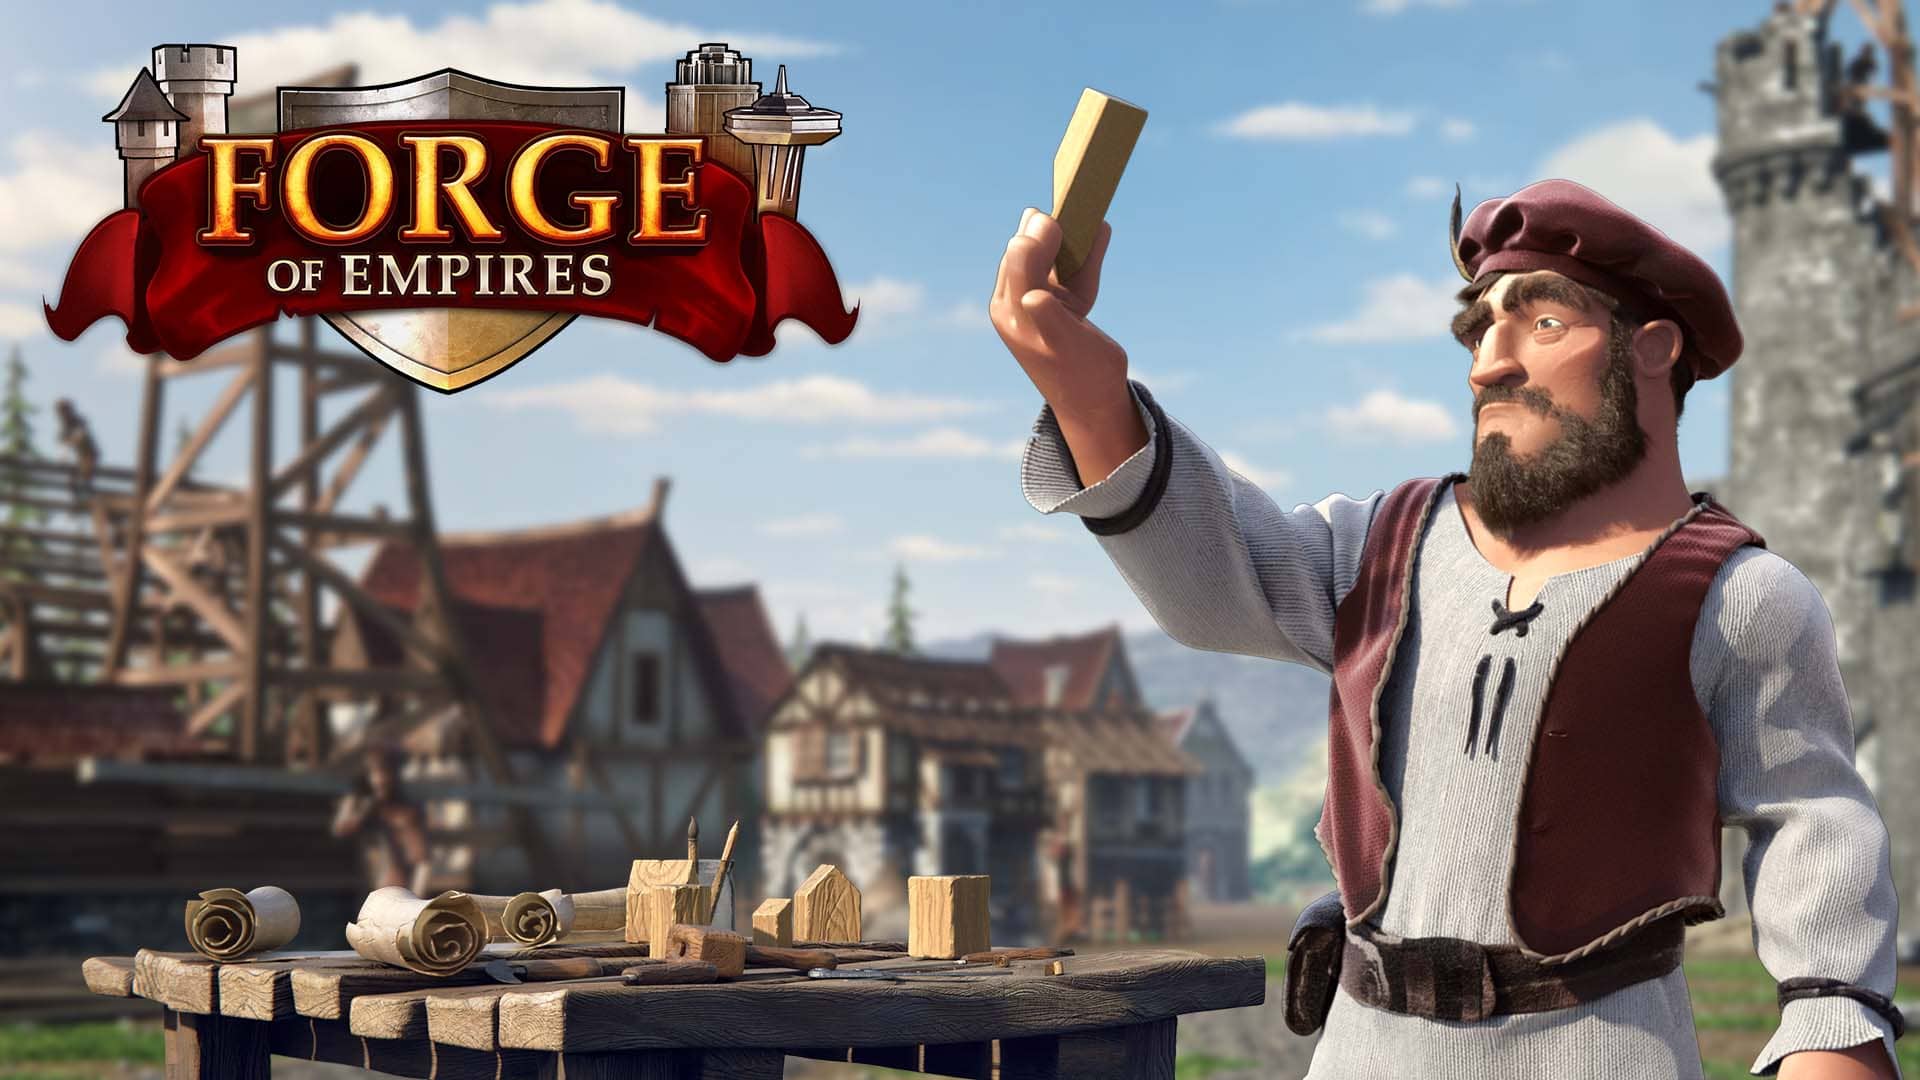 can i play forge of empires ios on pc